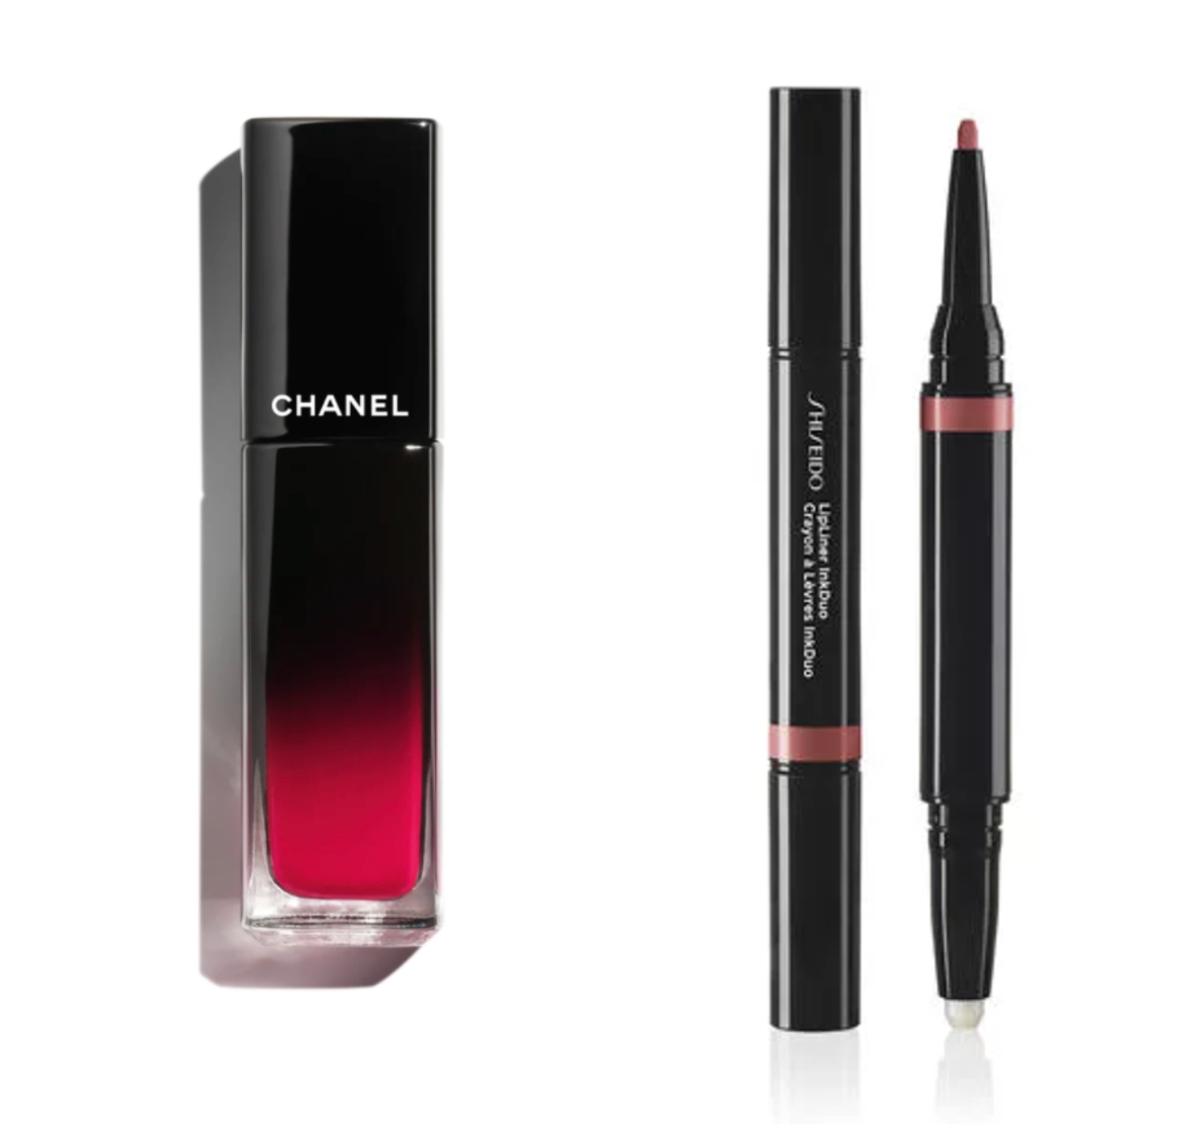 Immobilel n70 by Chanel with Mauve lip liner by Shiseido